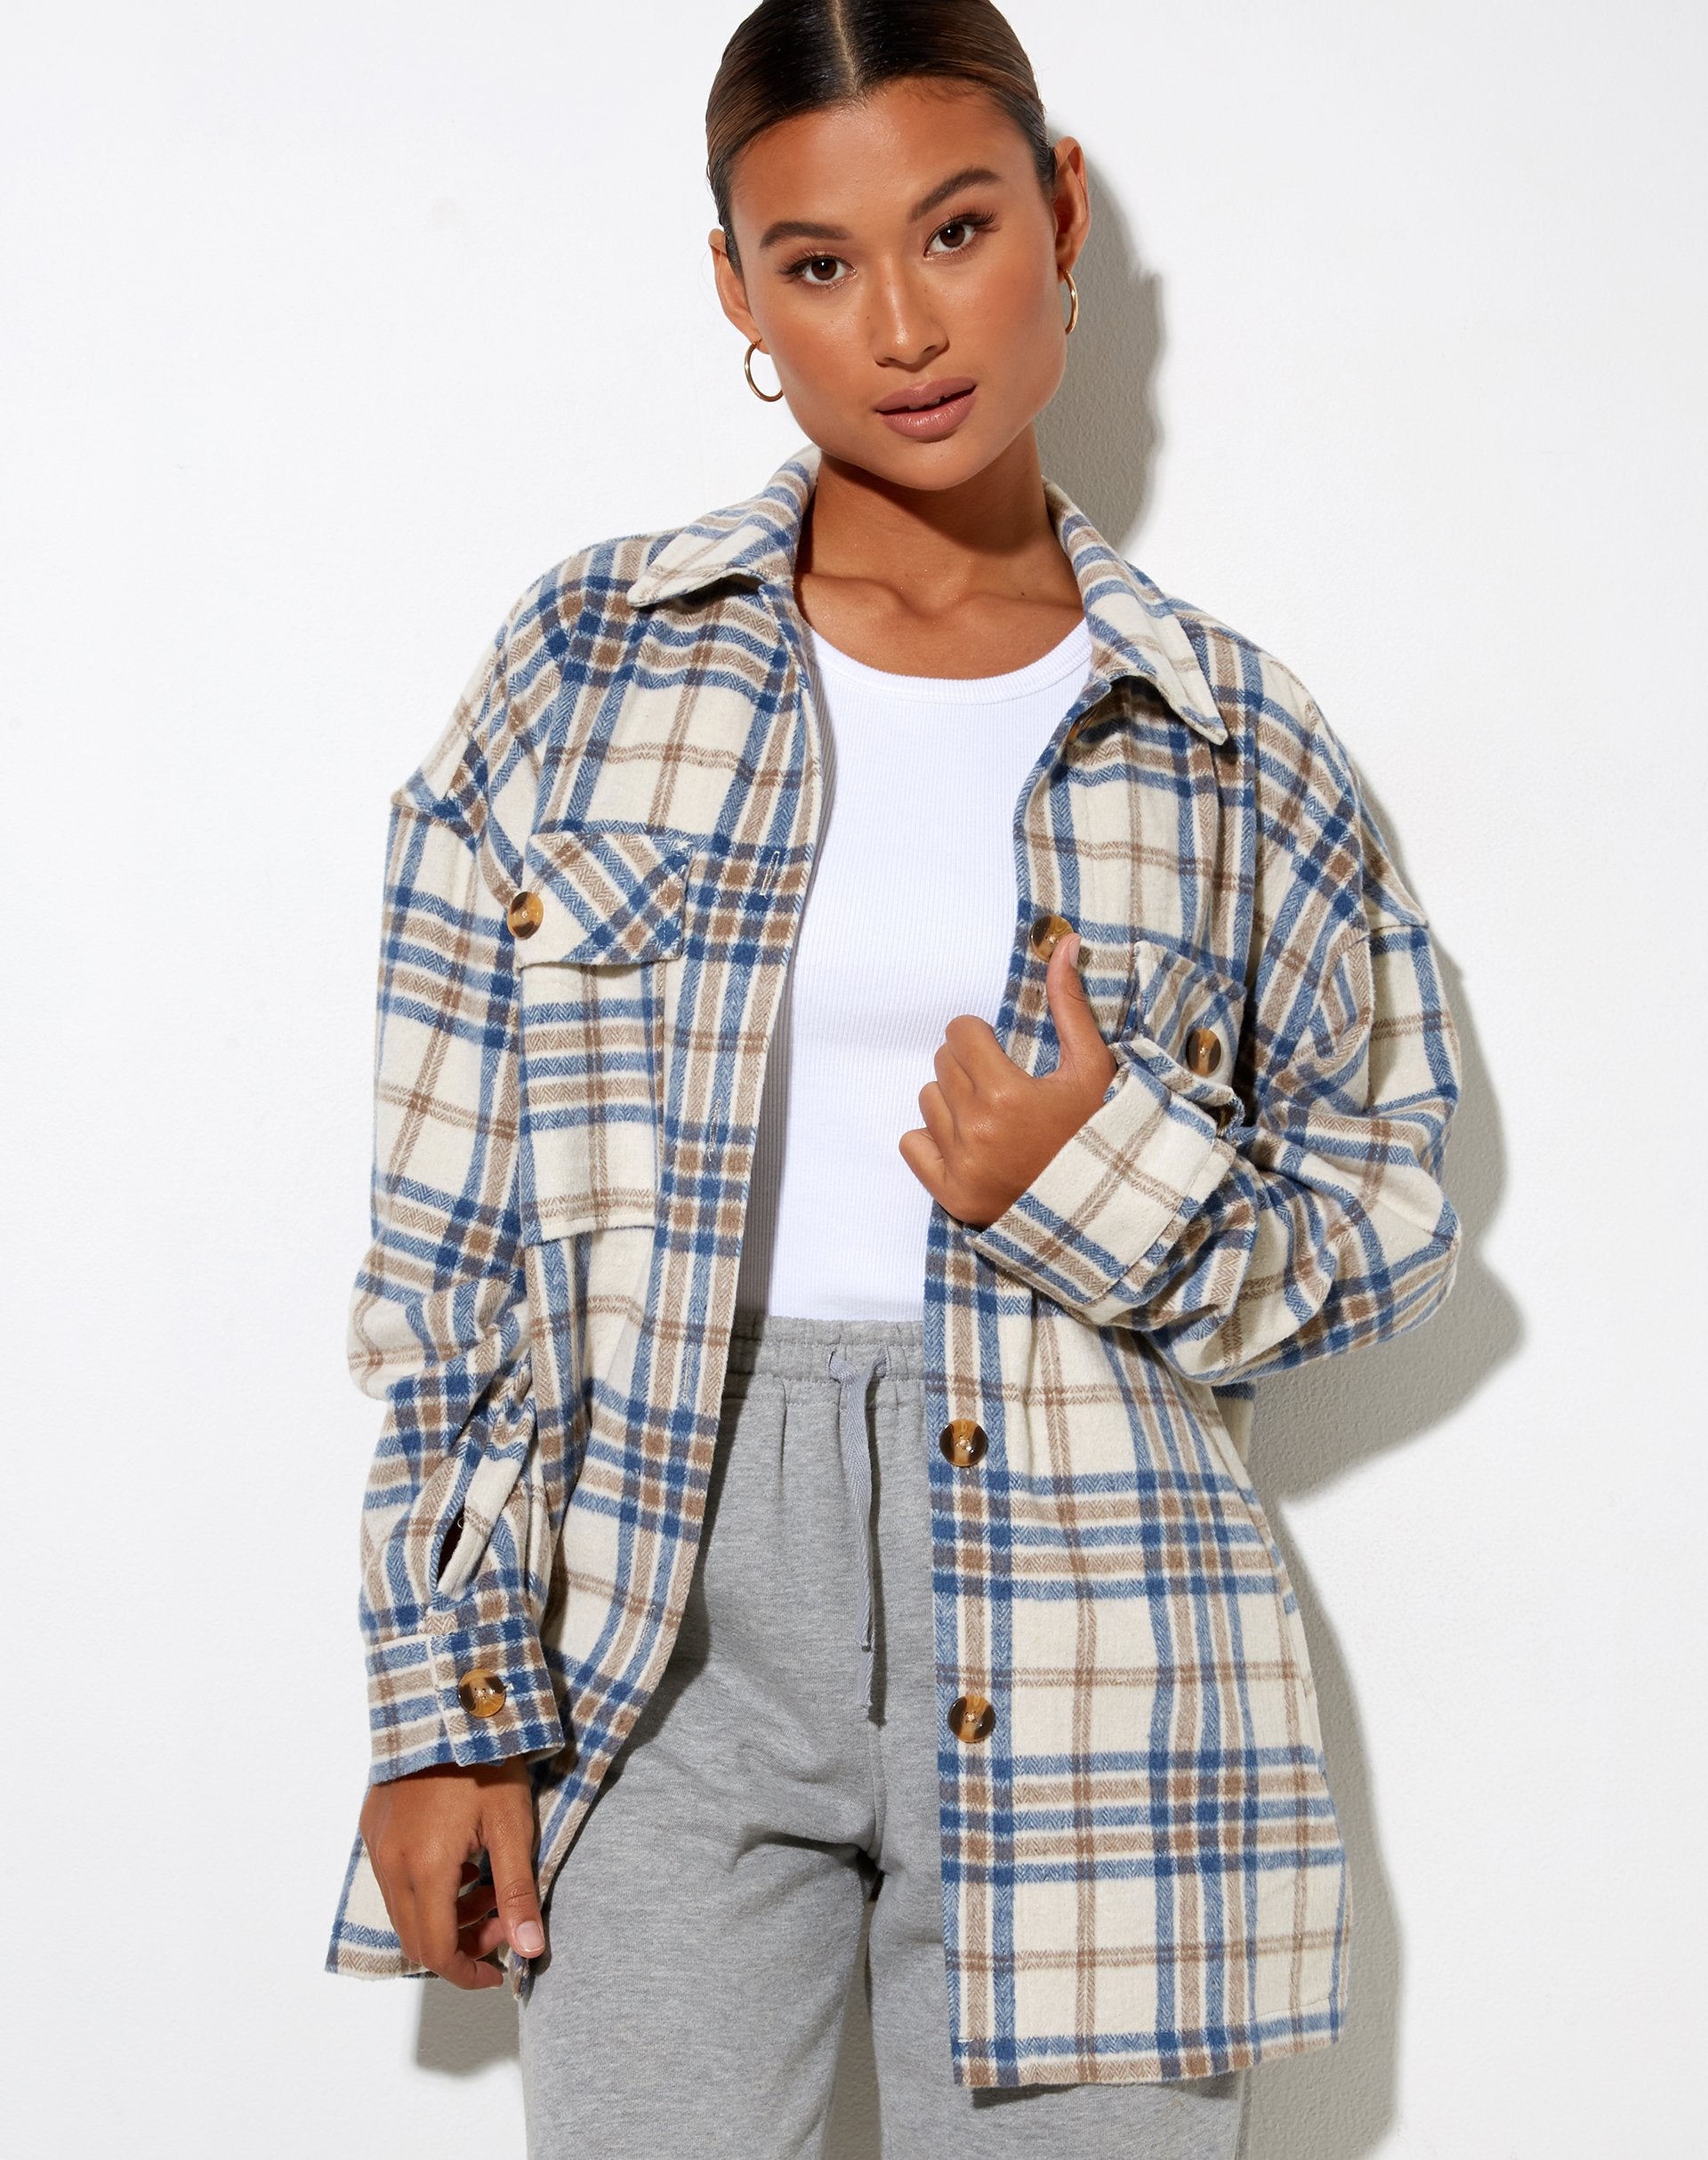 Image of Marcel Shirt in Big Check White Blue Tan